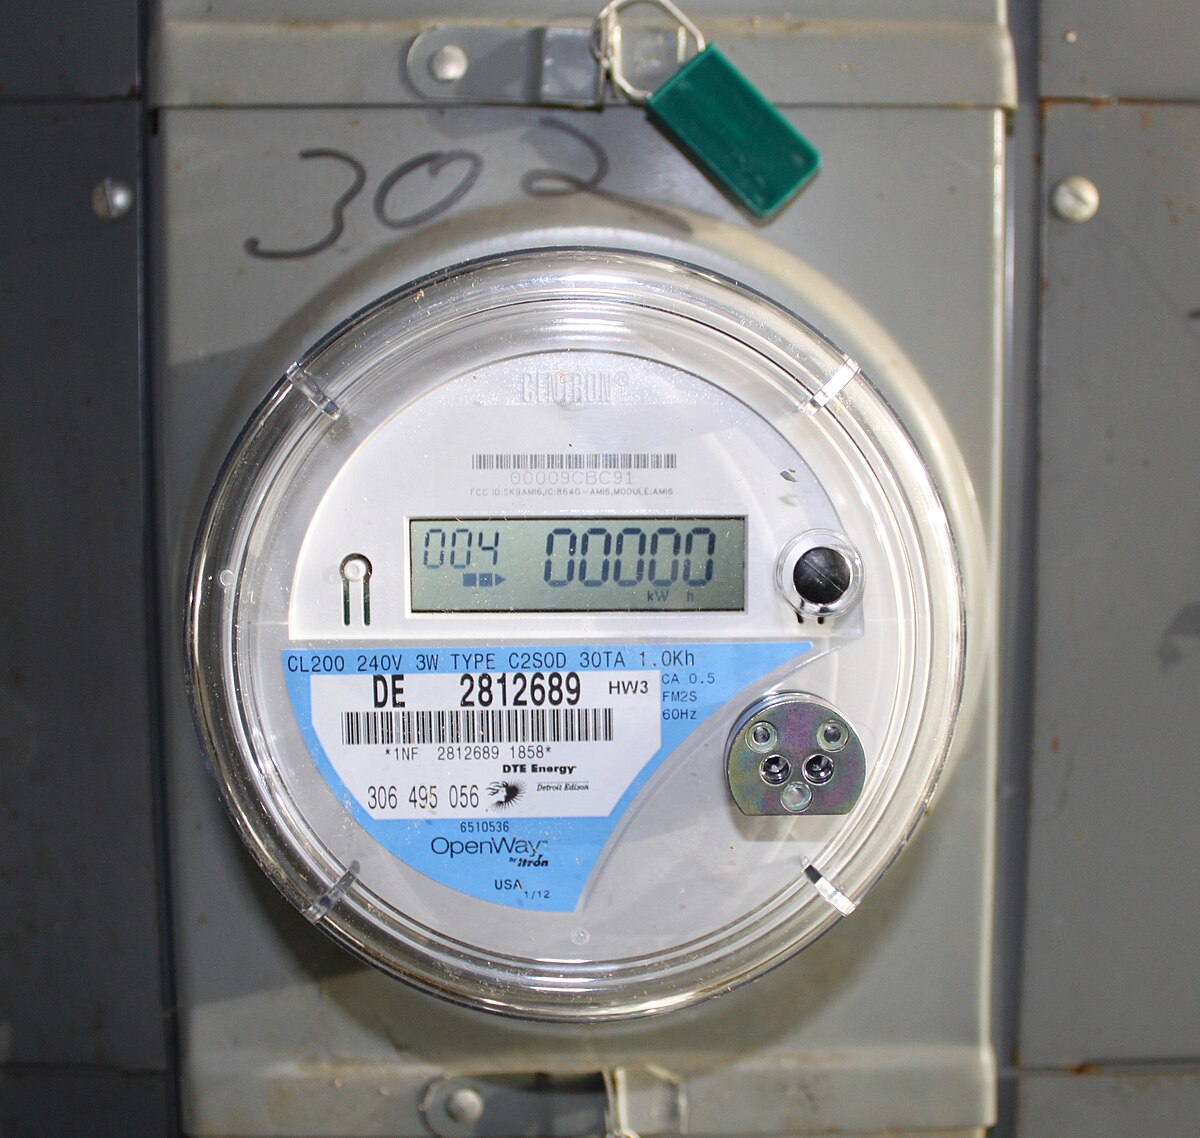 halen Archeologisch excelleren File:Itron OpenWay Electricity Meter with Two-Way Communications.JPG -  Wikipedia